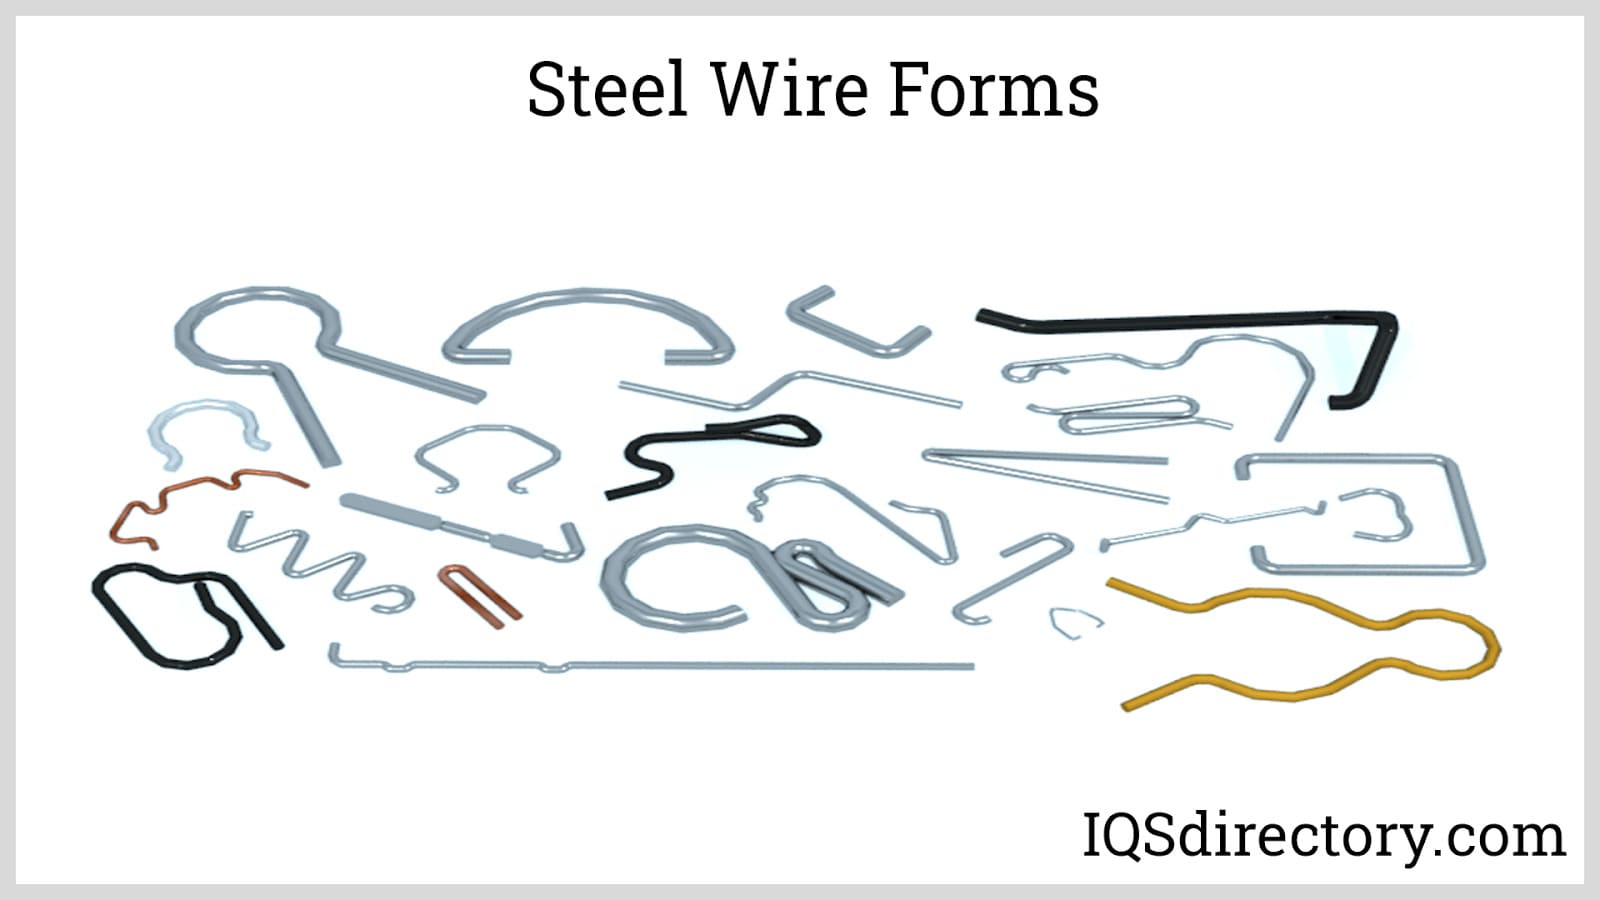 Steel Wire Forms